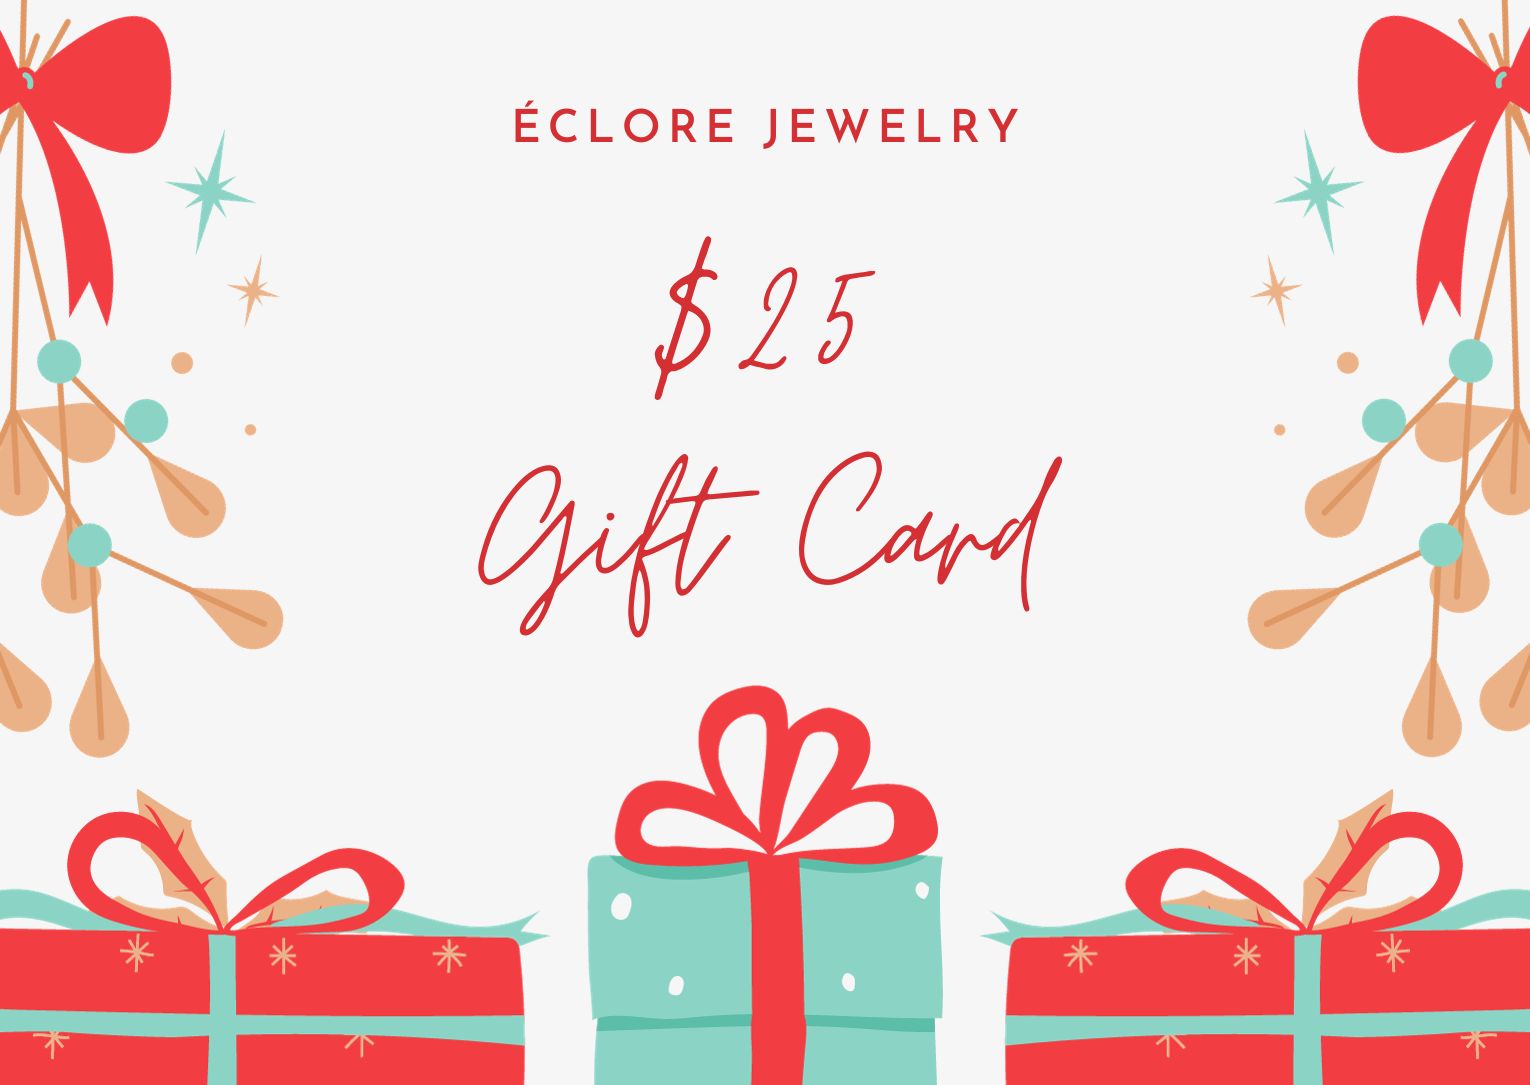 Éclore Jewelry Gift Card